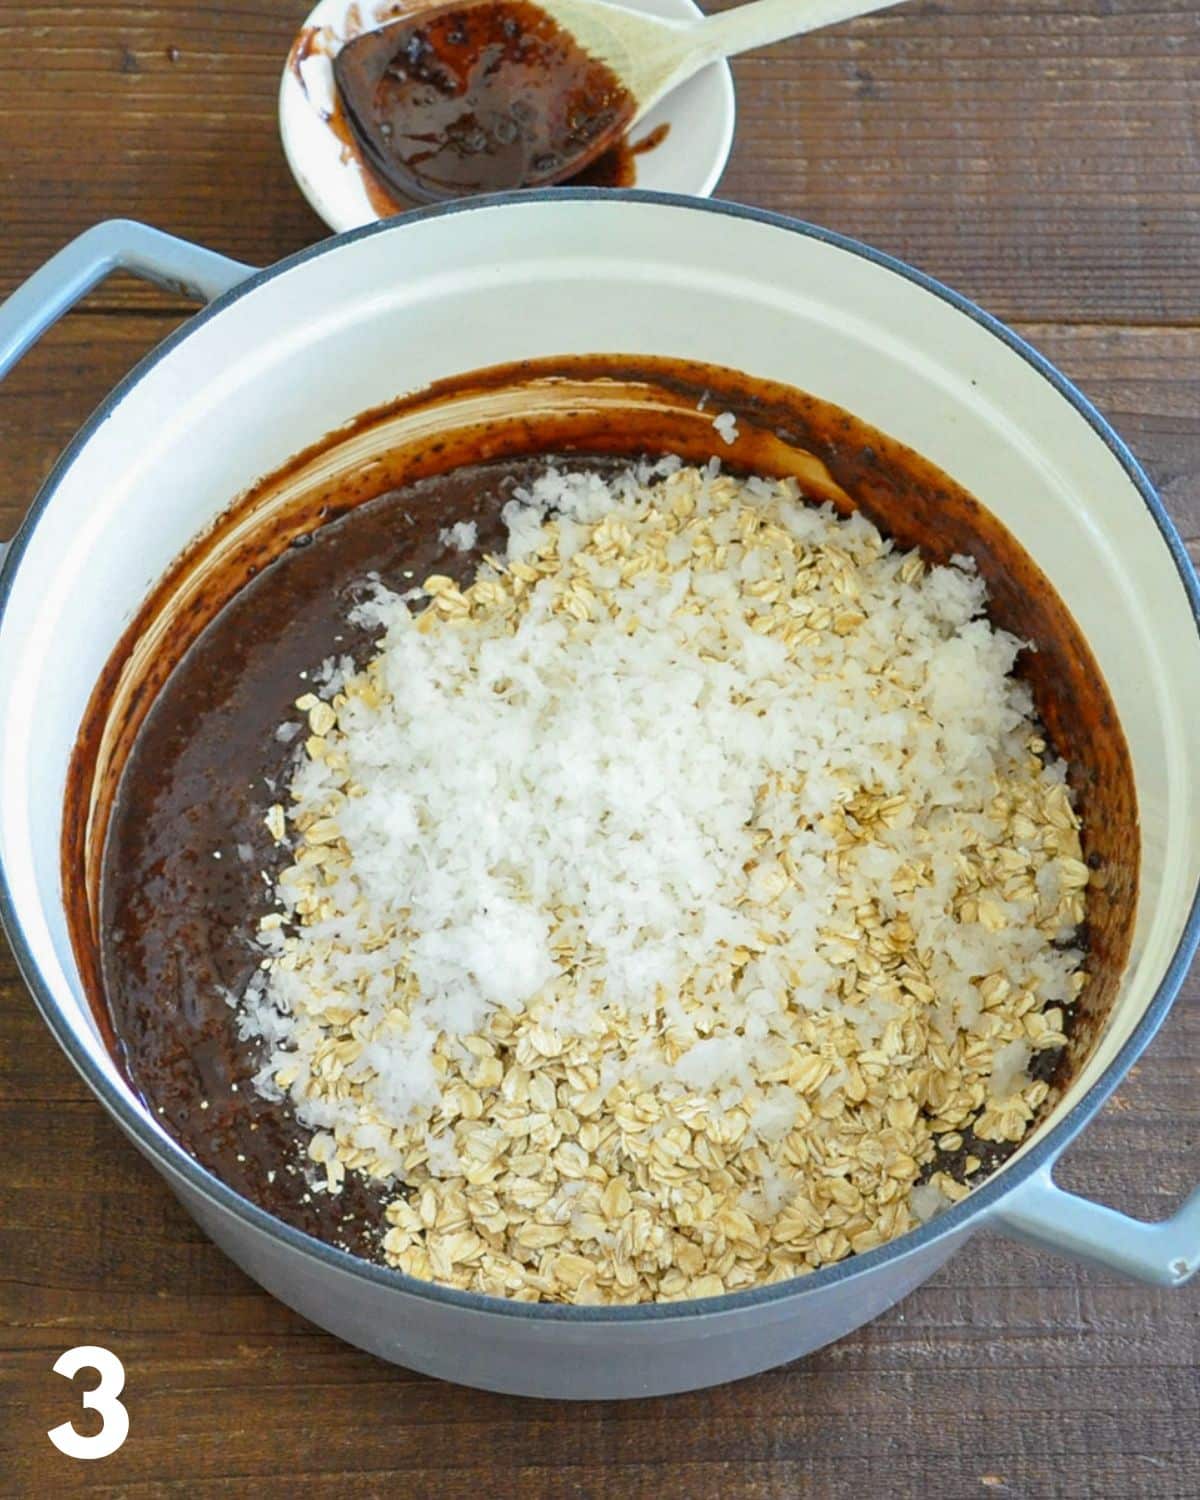 Oats and coconut being added to warm chocolate cookie mix.